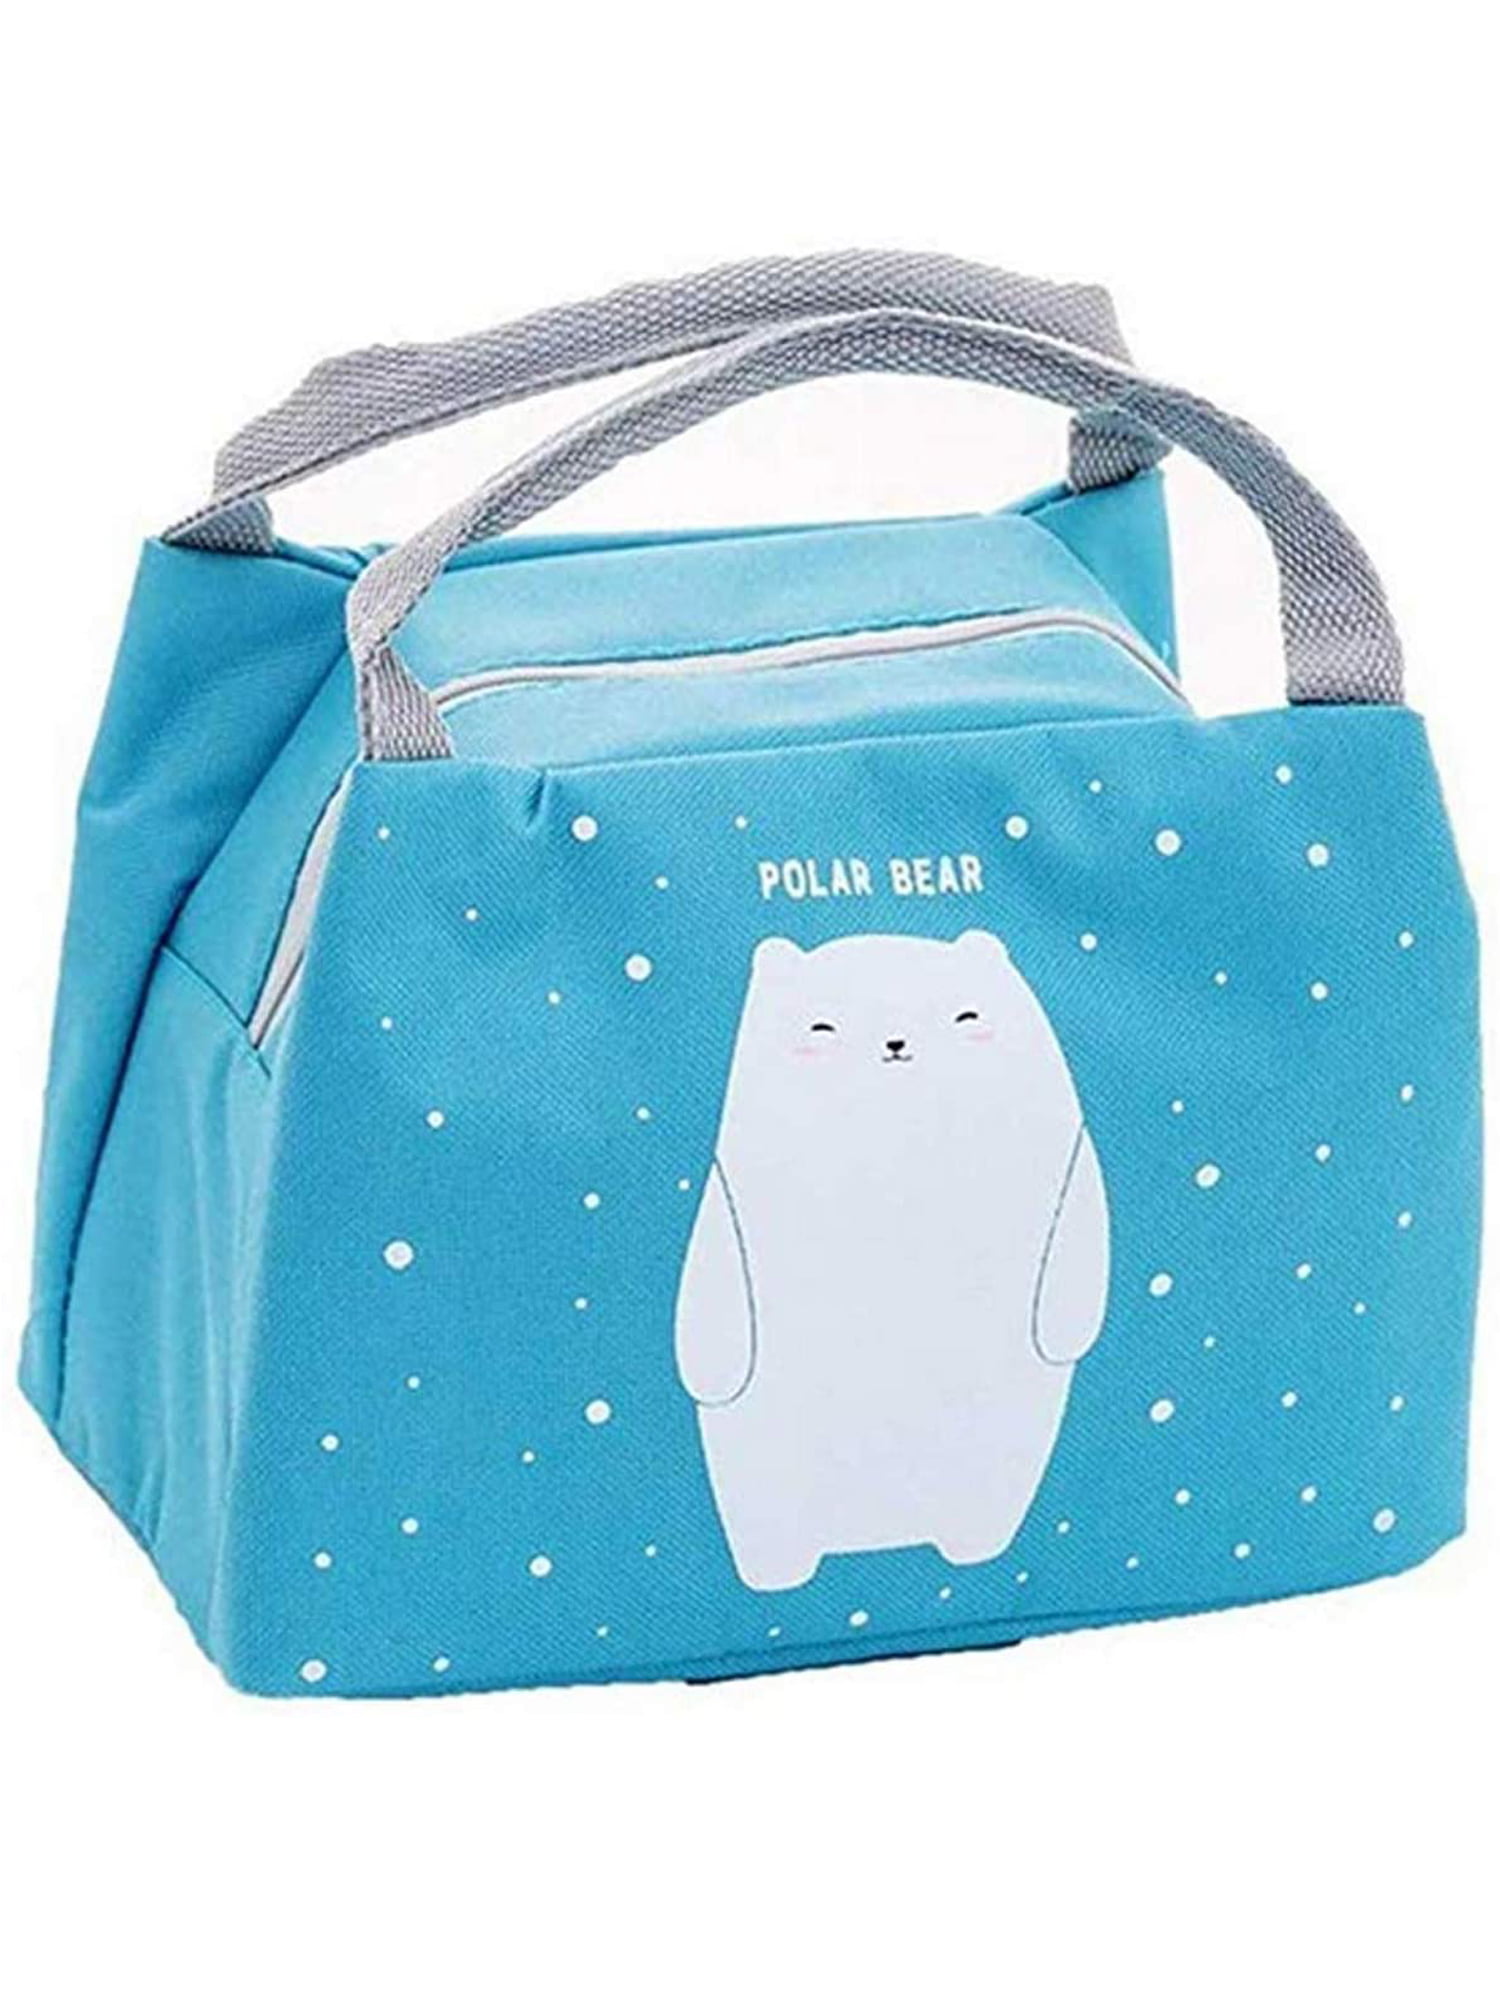 Waterproof Thermal Insulated Lunch Bag Oxford Cooler Bag Picnic Pouch Lunch Box